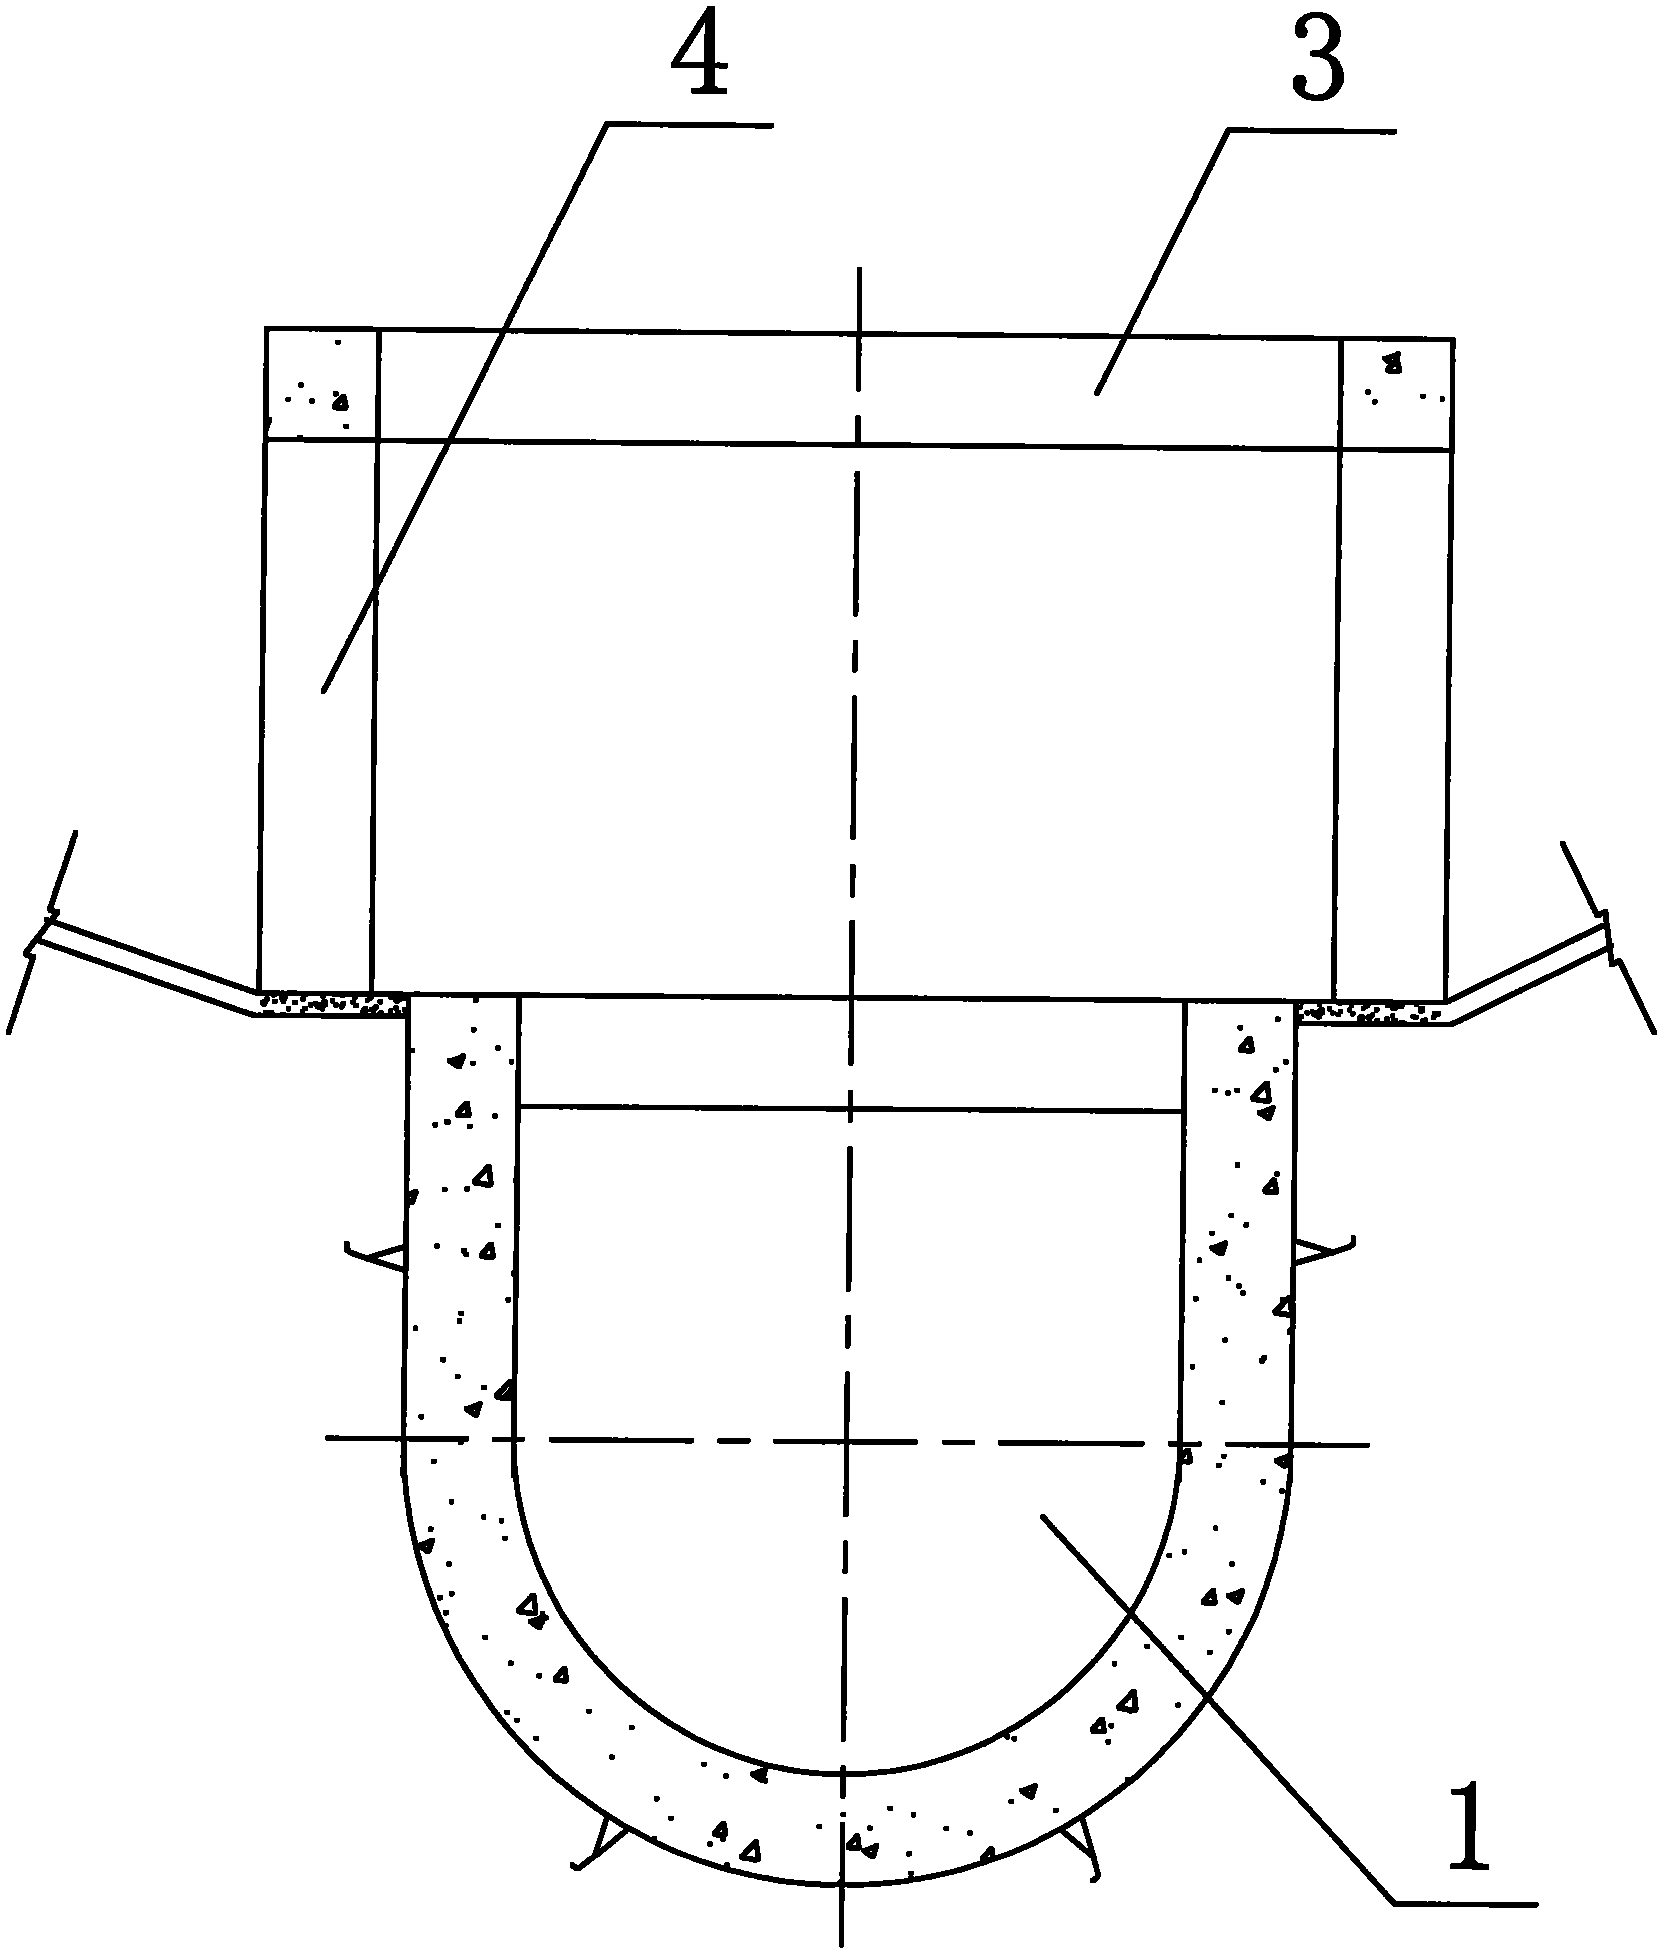 Sink-type top inflow sand flushing gallery structure